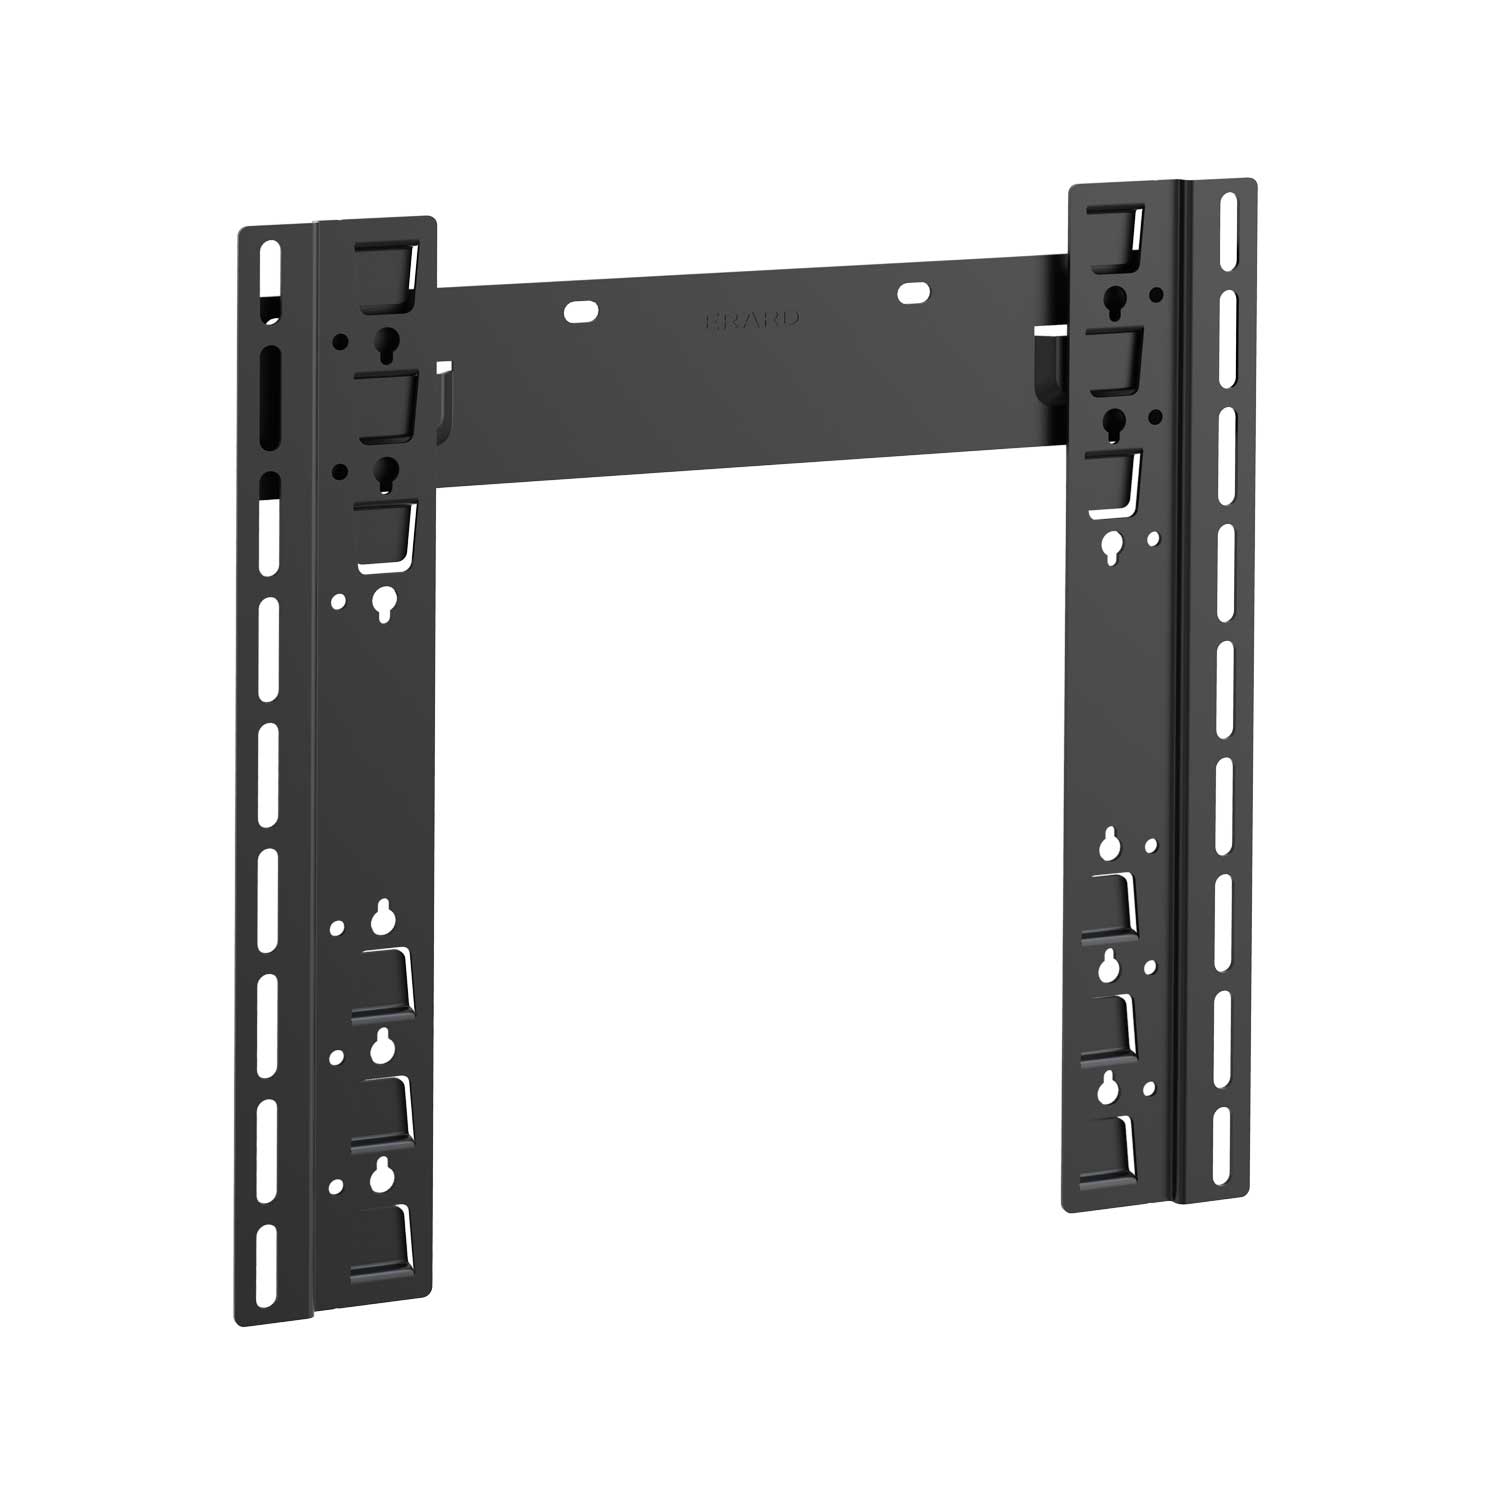 APPLIK FIXED - wall screen mount for screens up to 70kg